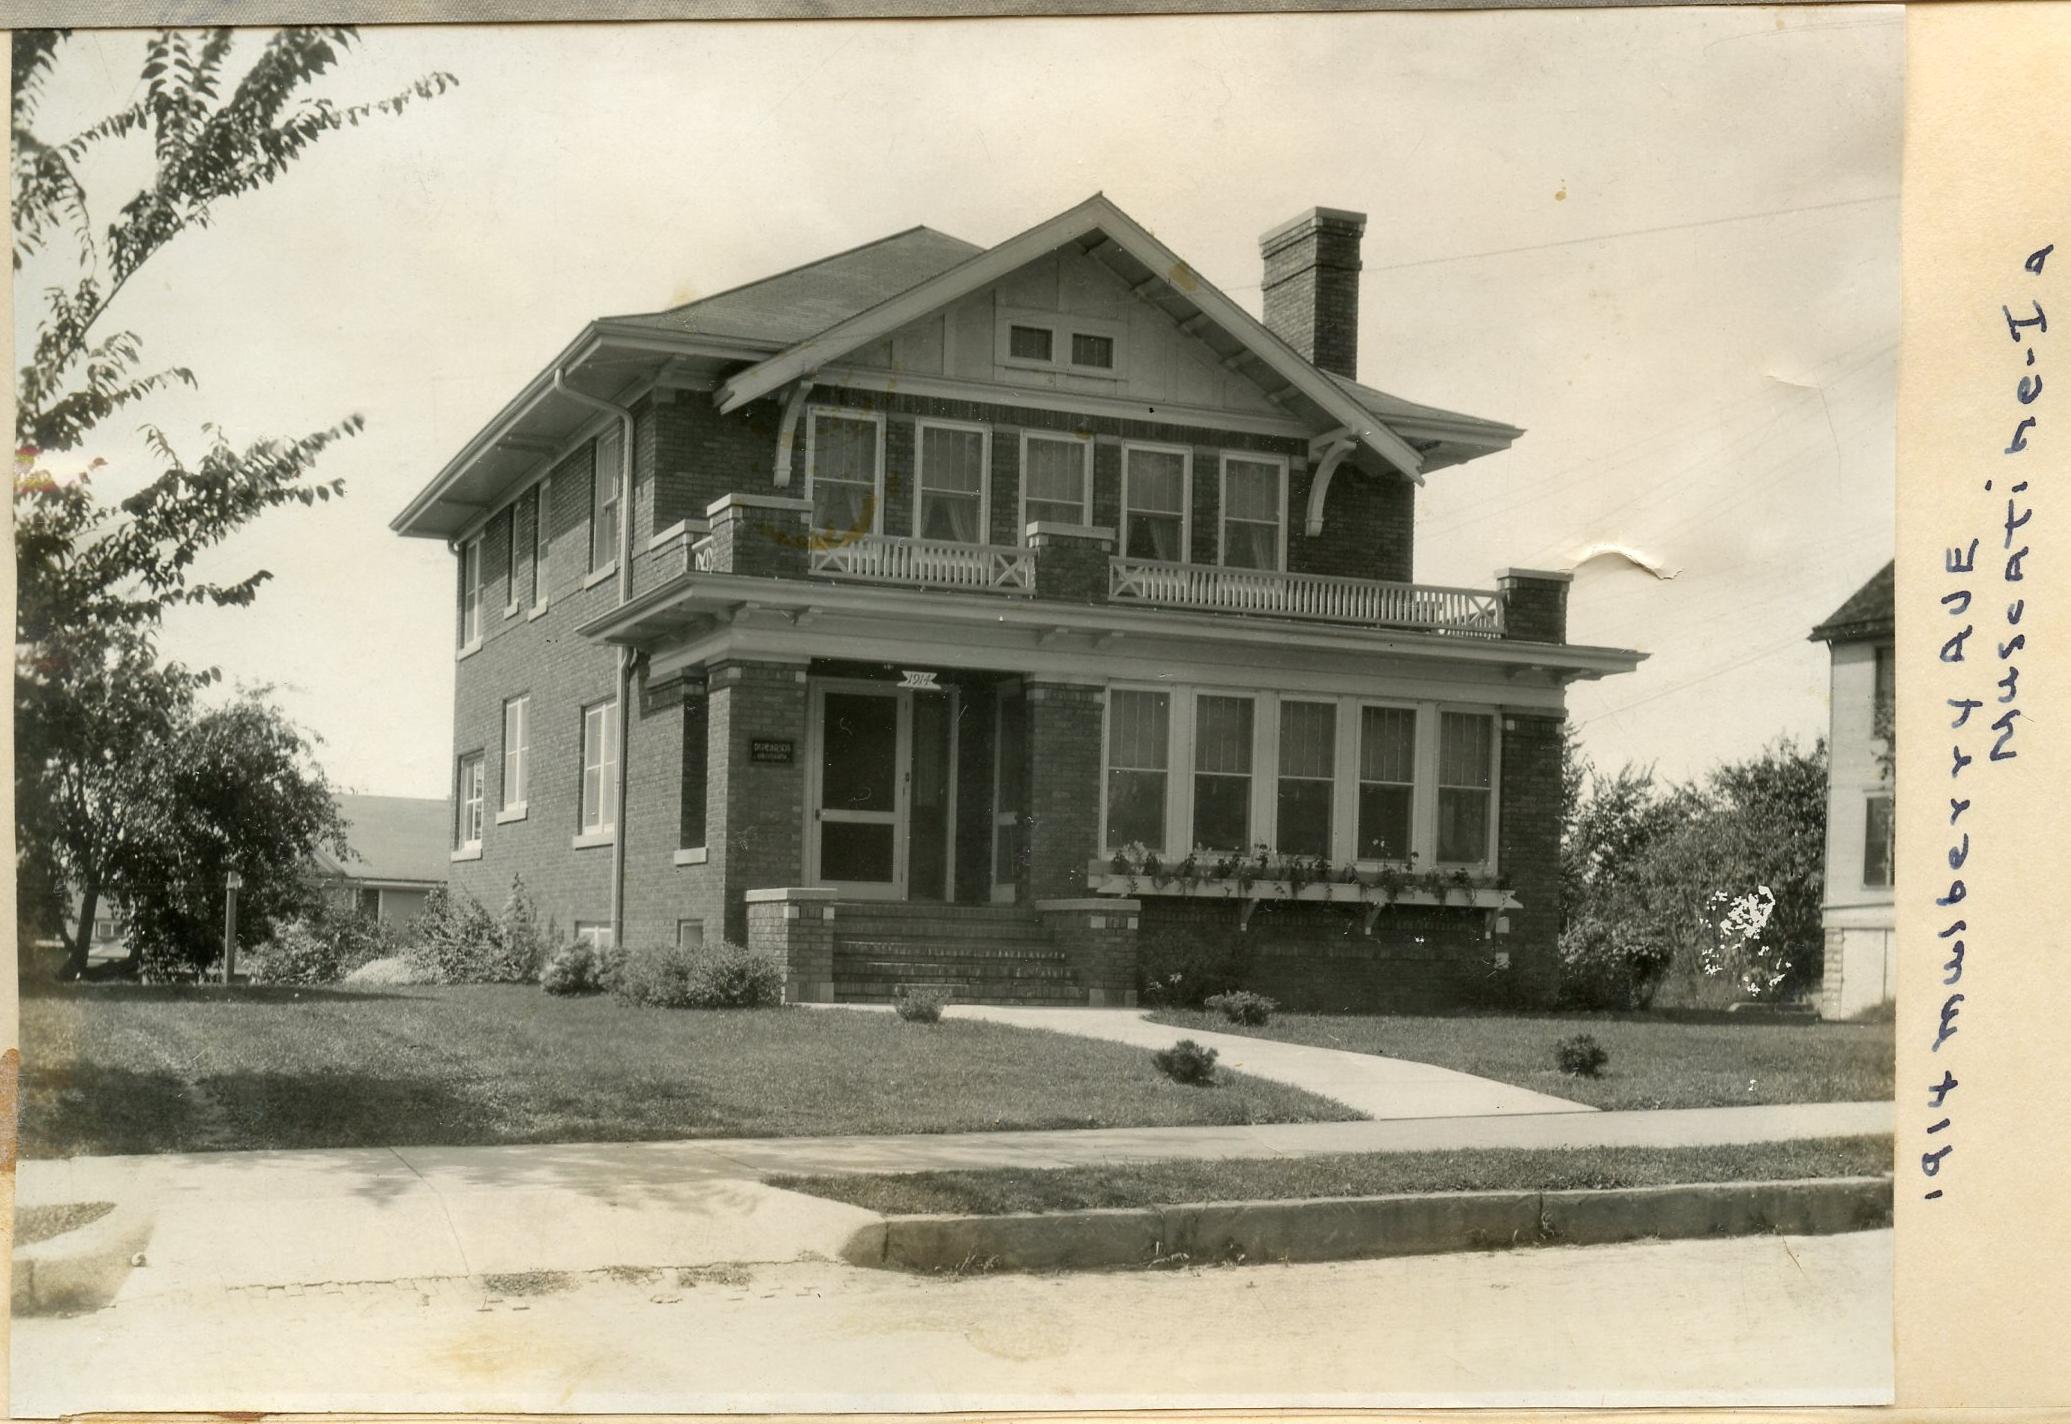 Photograph of the Dr. Roy Pearson’s house.